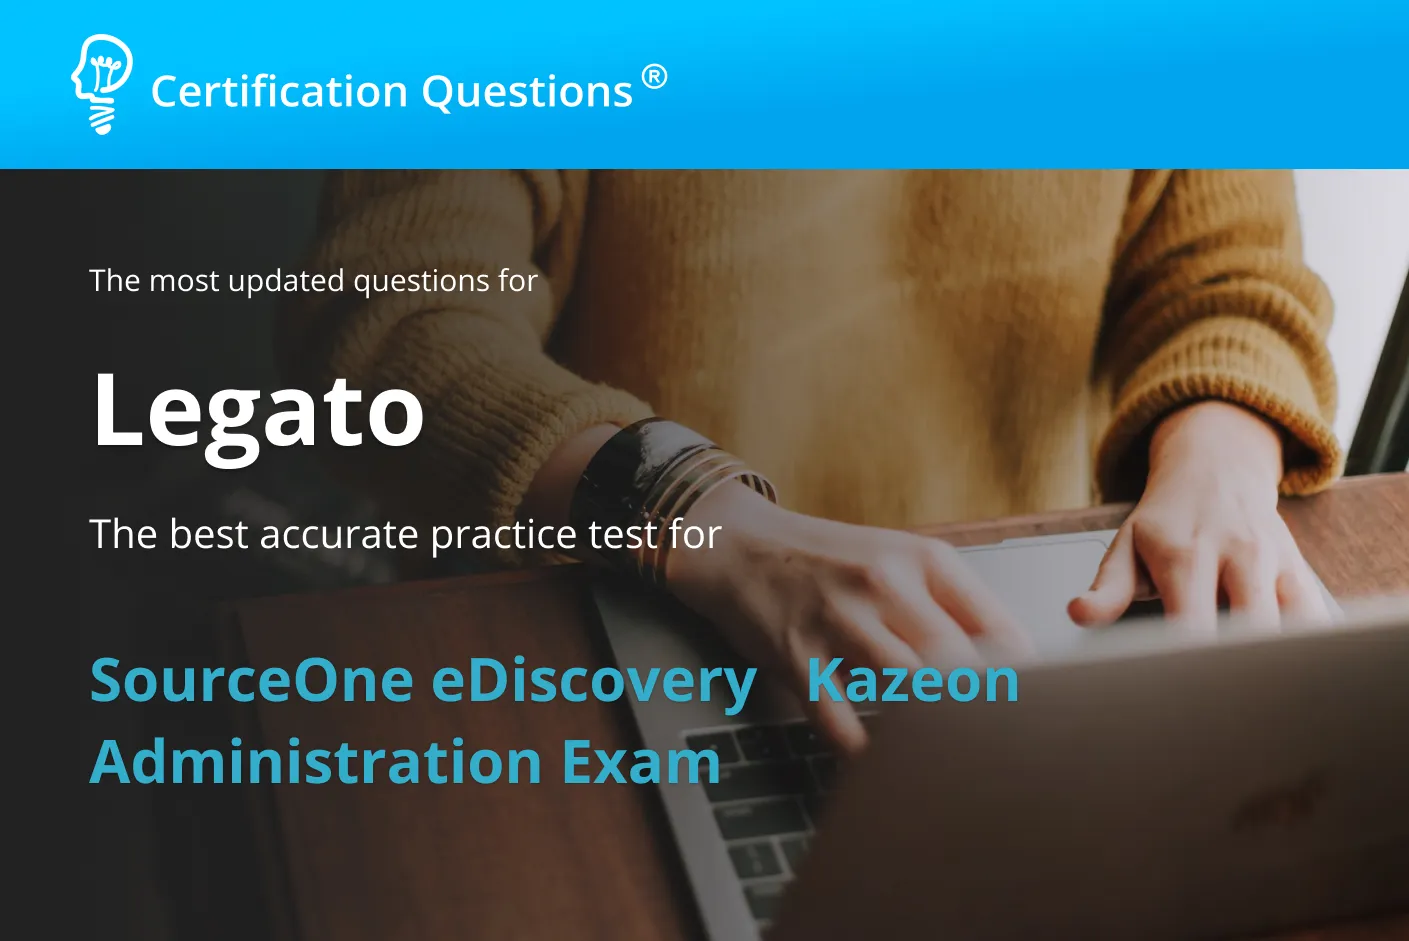 This is the image about SourceOne eDiscovery Kazeon Administration Exam